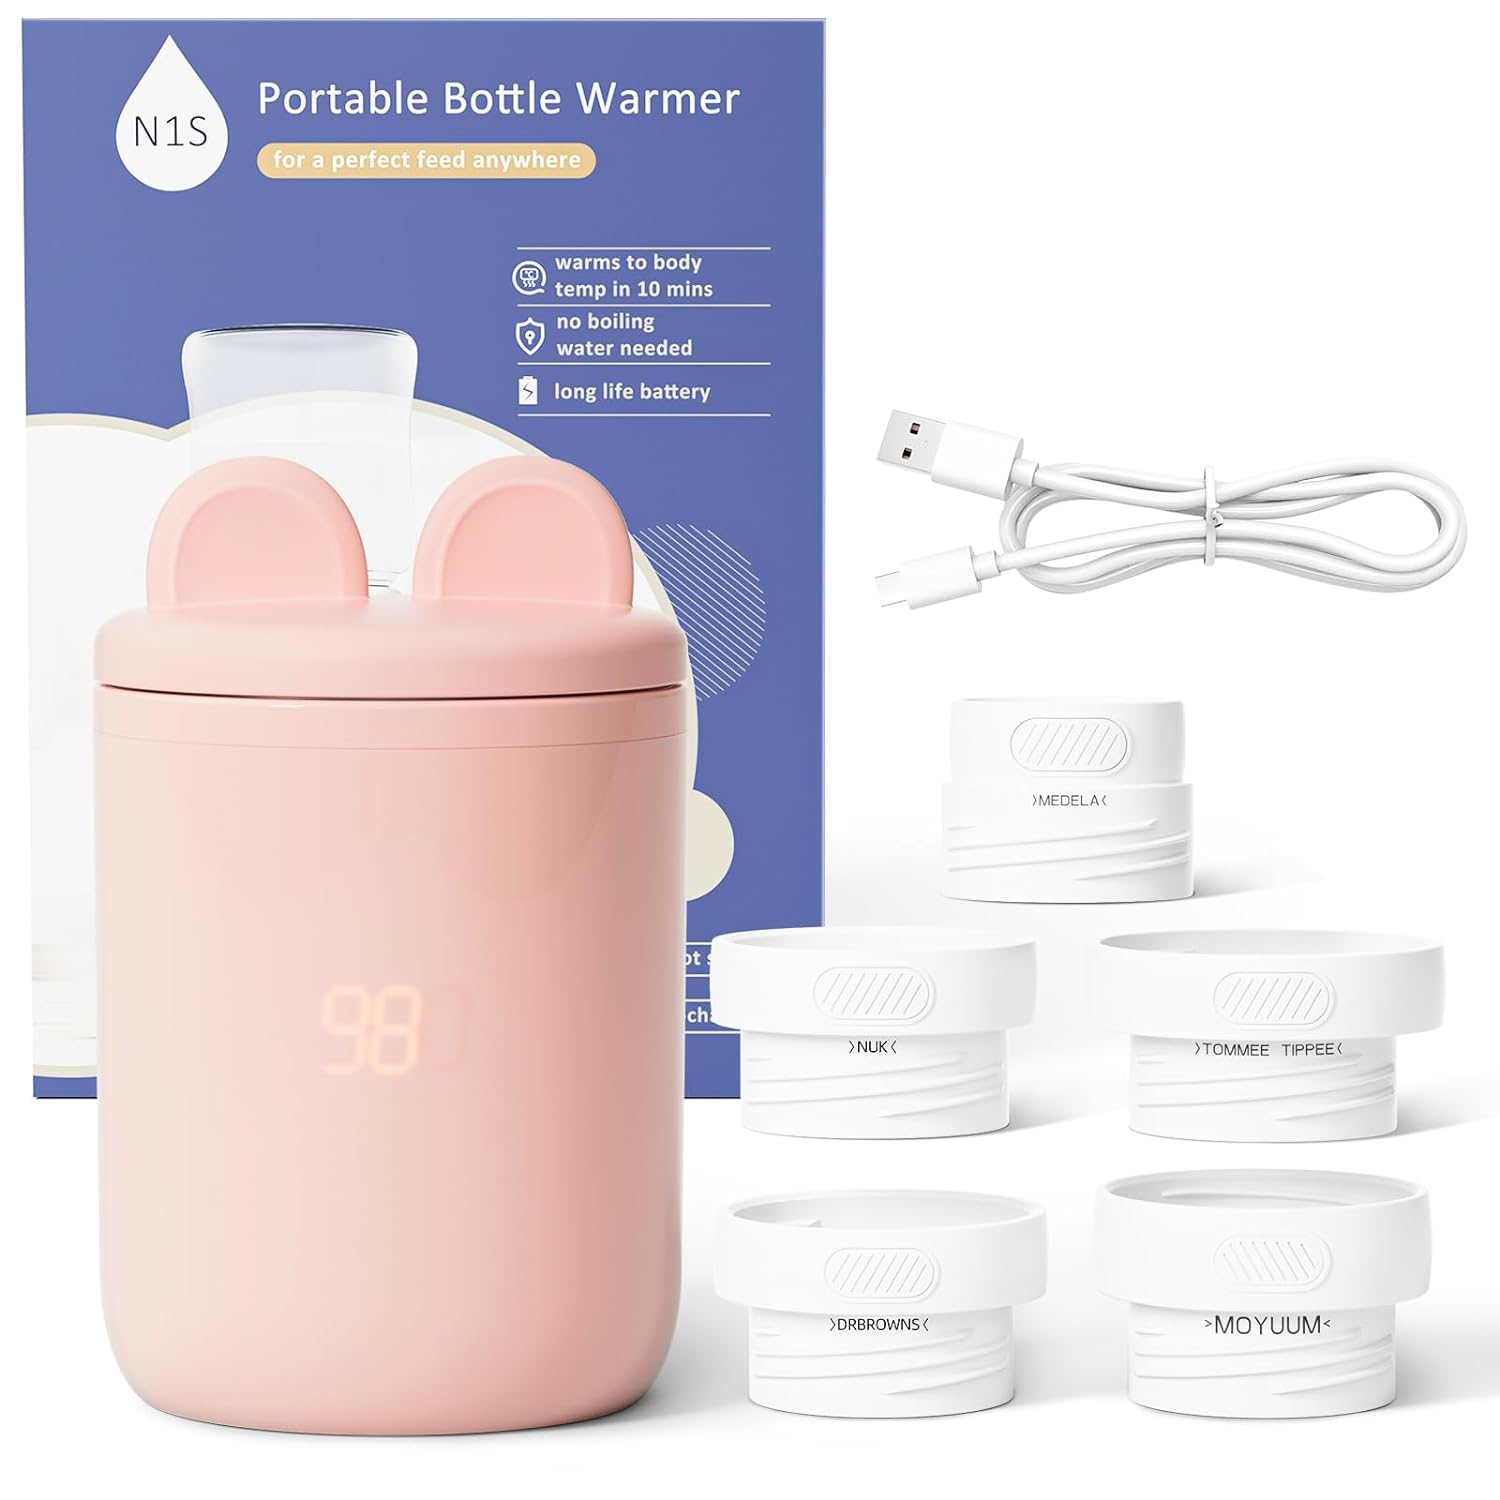 Iuzuo Portable Baby Bottle Warmer, Fast Baby Bottle Warmer for Travel with 5 Adapters, Rechargeable Bottle Warmer On The Go with Precise Temperature Control for Breast Milk, Formula